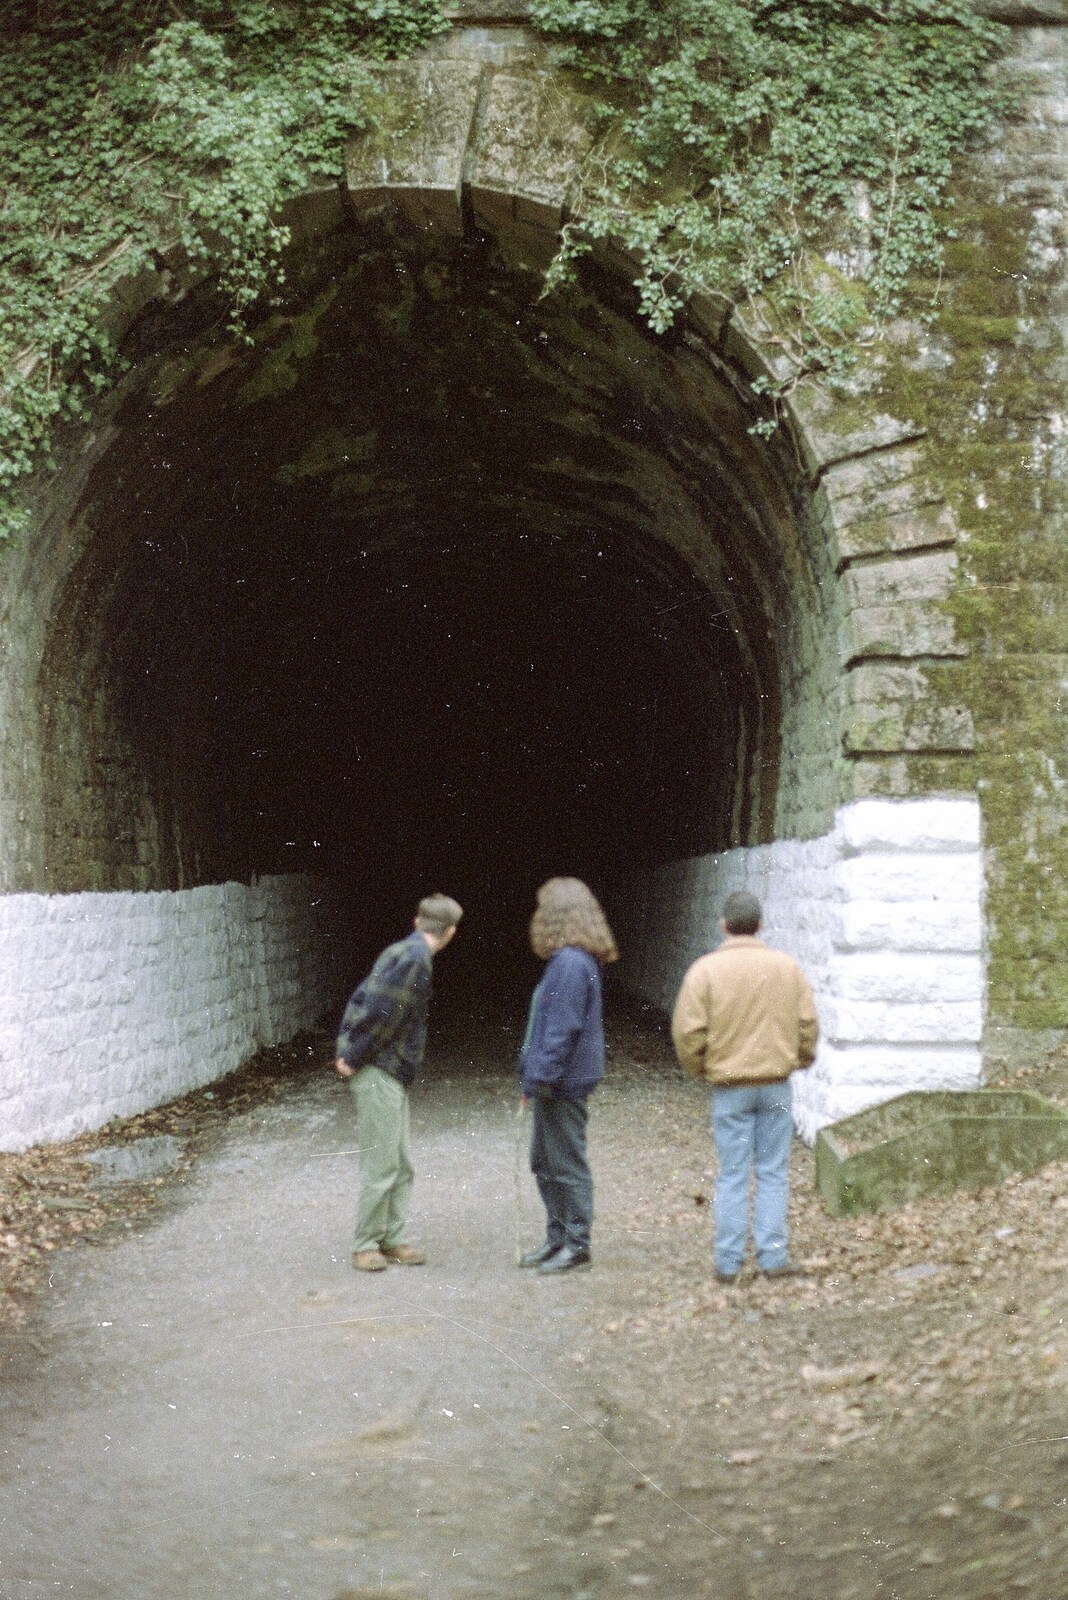 Looking into the Hoo Meavy railway tunnel from A CISU Trip to Plymouth, Devon - 1st May 1998